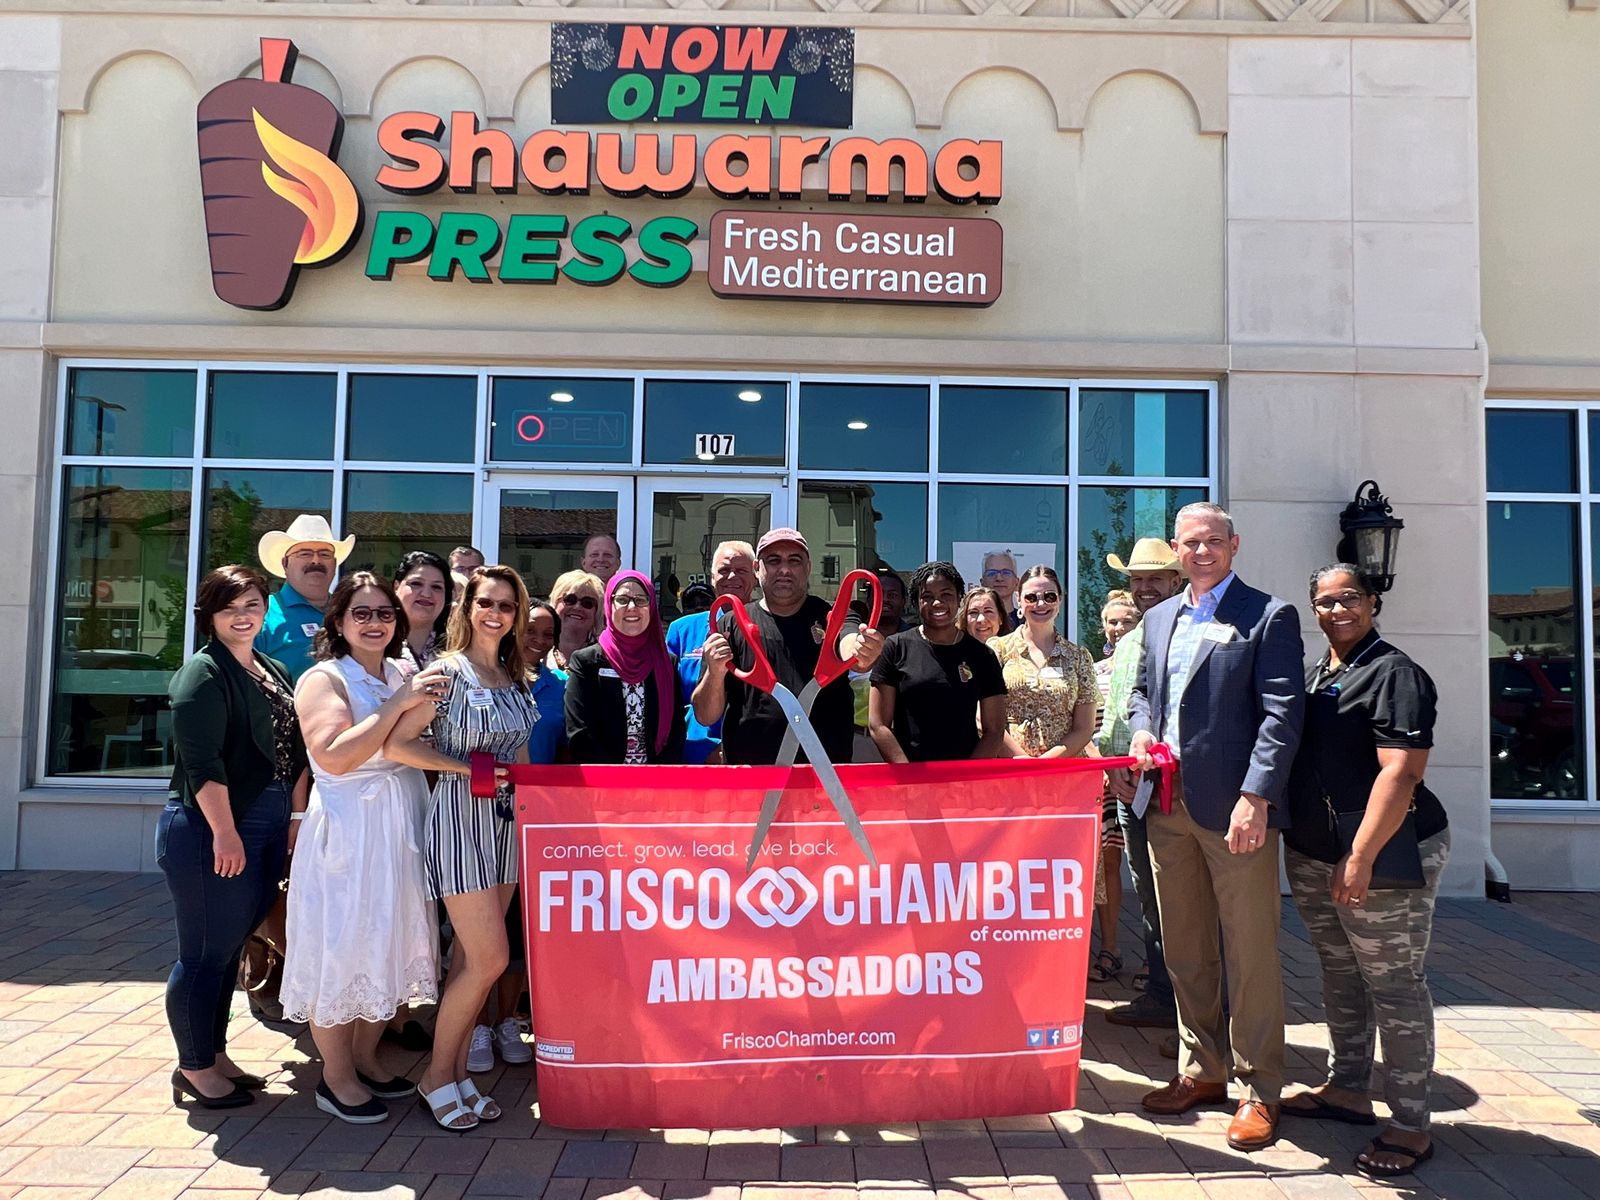 Shawarma Press Continues Expansion in Texas With Opening of Its Sixth Location in Frisco